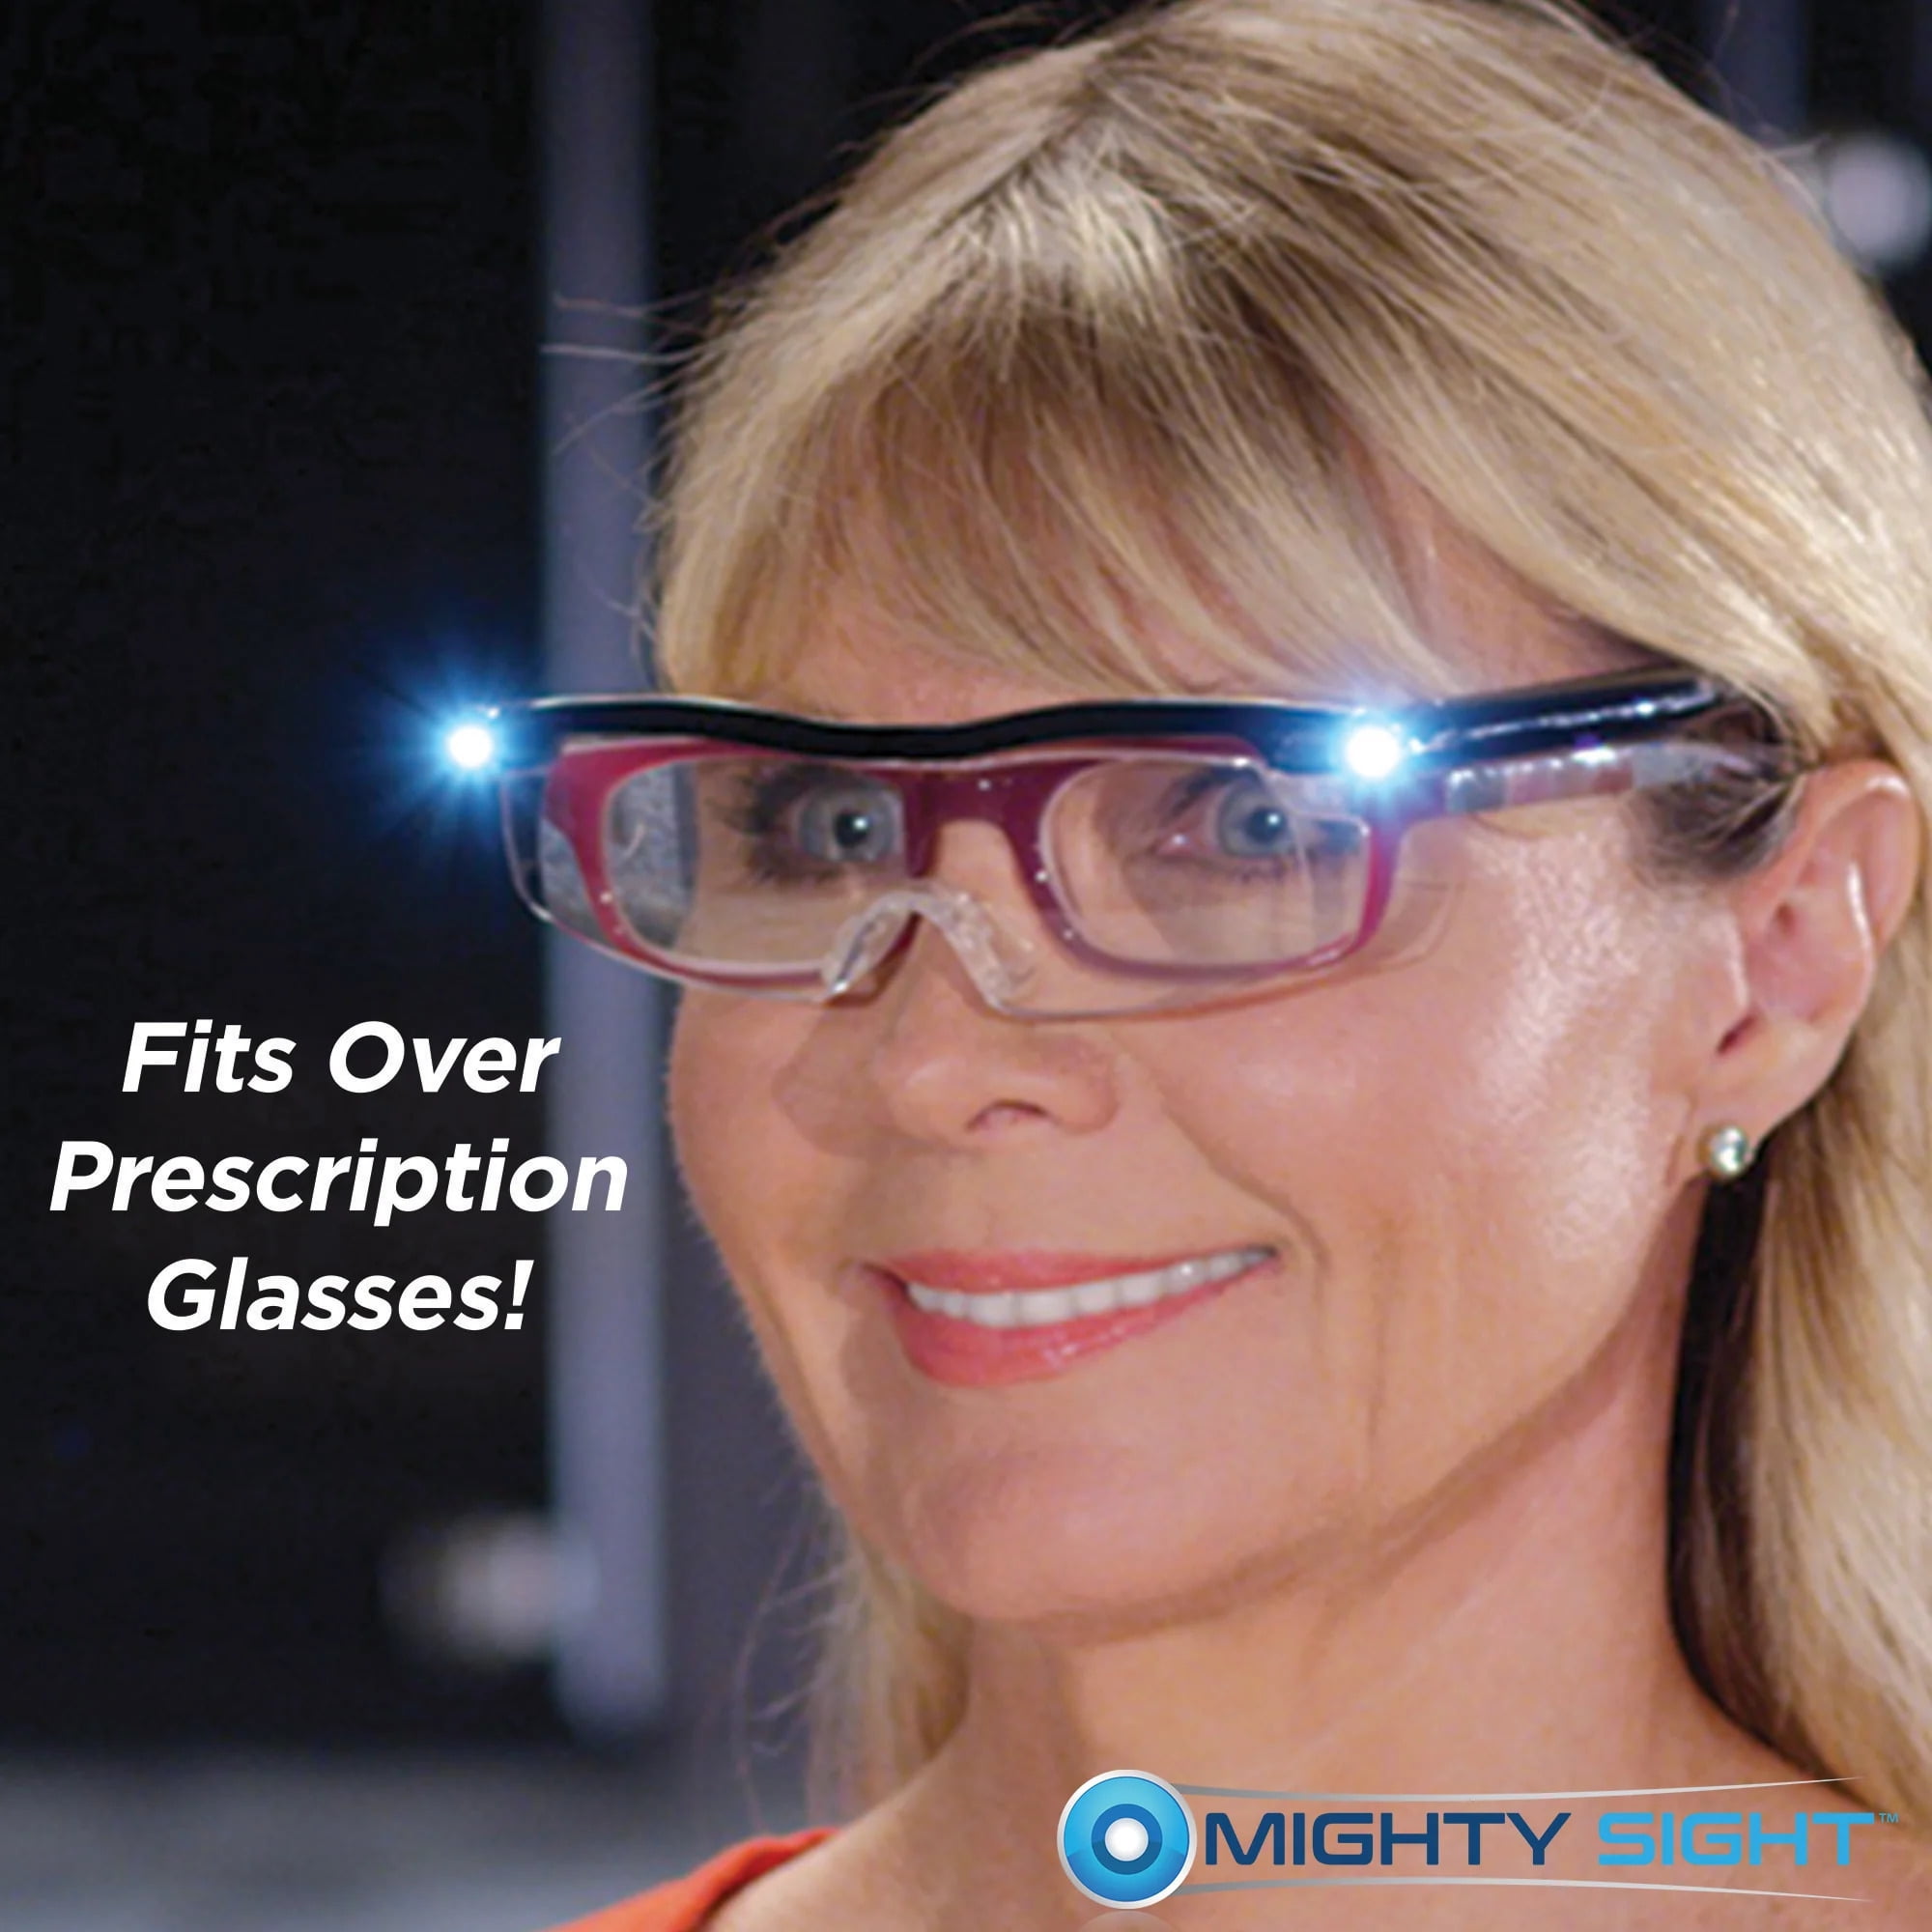 Mighty Sight LED Magnifying Eyewear Glasses as Seen on TV for sale online